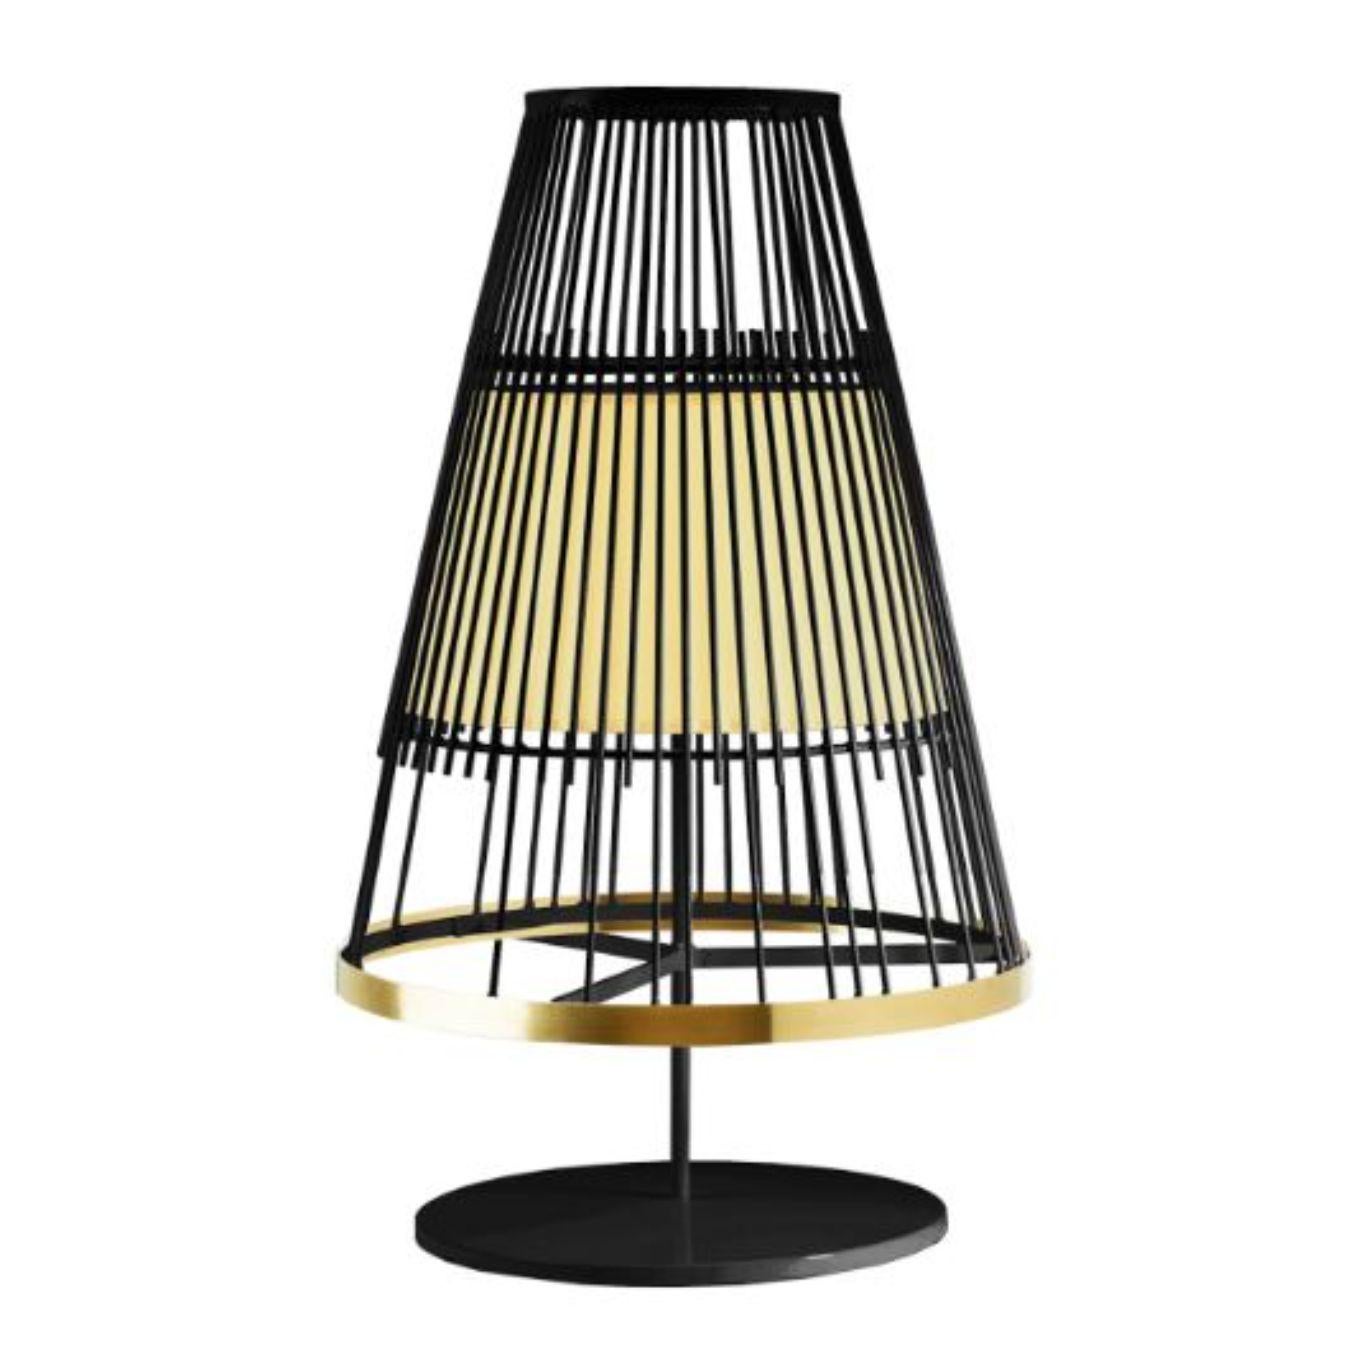 Black up table lamp with brass ring by Dooq
Dimensions: W 44 x D 44 x H 72 cm
Materials: lacquered metal, polished or brushed metal, brass.
Abat-jour: cotton
Also available in different colors and materials.

Information:
230V/50Hz
E27/1x10W